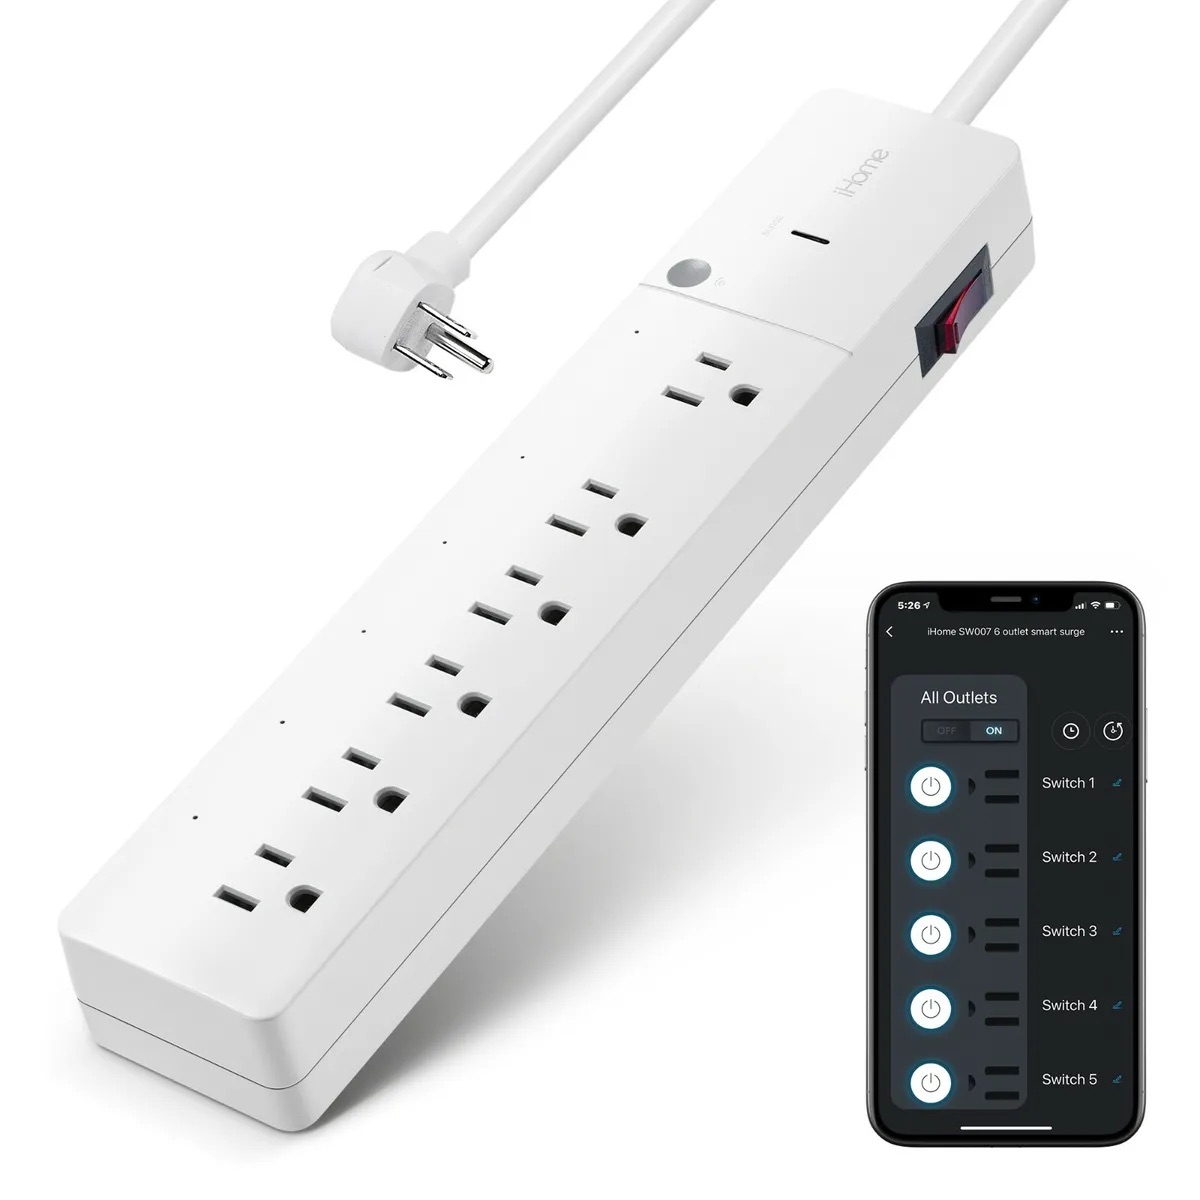 GHome Smart Plug Power Strip, WiFi Surge Protector Work with Alexa Google  Home, Smart Outlets with 3 USB 3 Charging Port, Multi-Plug Extender for  Home